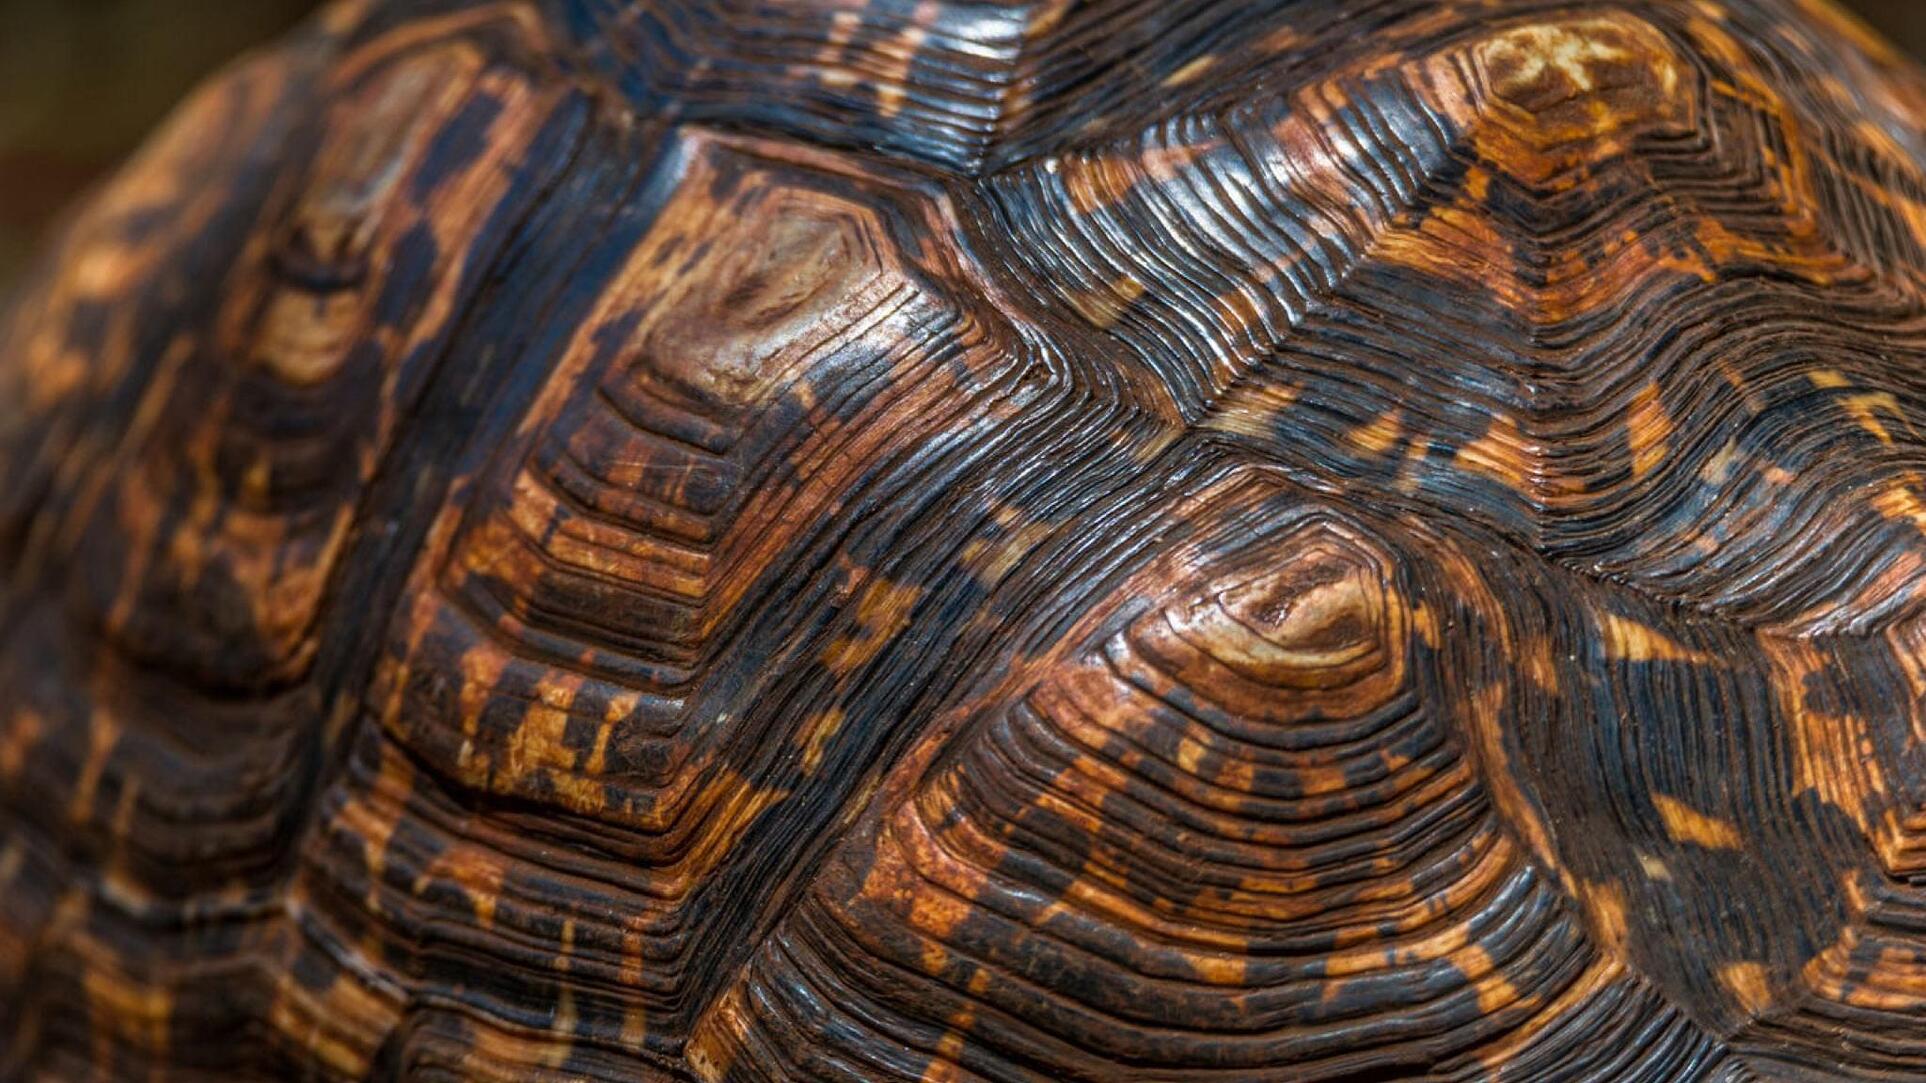 A brown tortoise shell showing the origins behind tortoise shell pattern glasses.